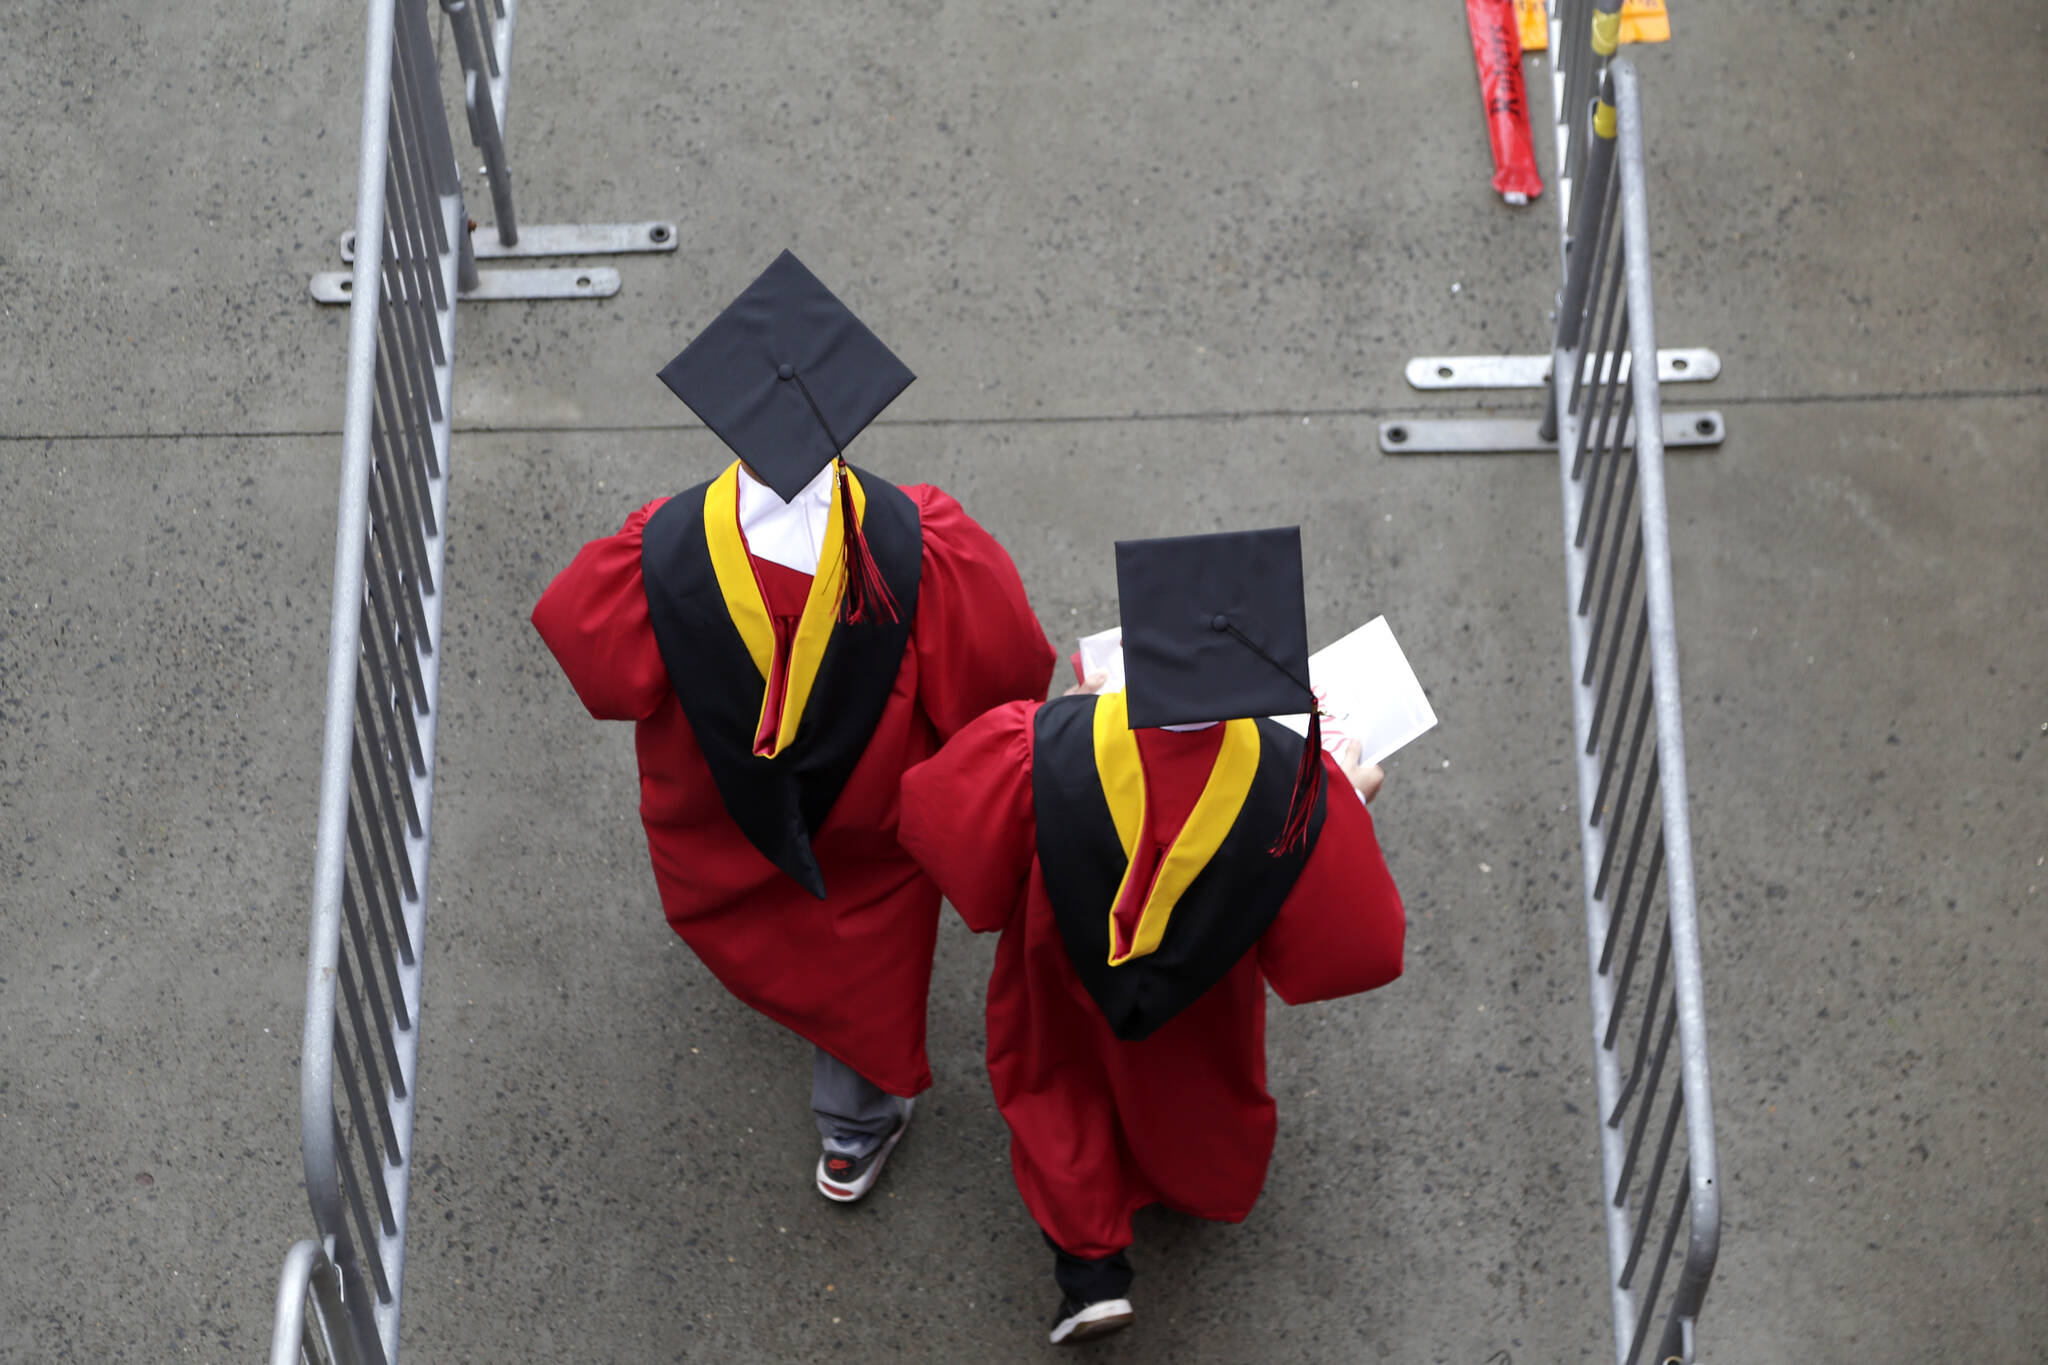 FILE - New graduates walk into the High Point Solutions Stadium before the start of the Rutgers University graduation ceremony in Piscataway Township, N.J., on May 13, 2018. The Supreme Court is about to hear arguments over President Joe Biden’s student debt relief plan. It’s a plan that impacts millions of borrowers who could see their loans wiped away or reduced. (AP Photo / Seth Wenig)